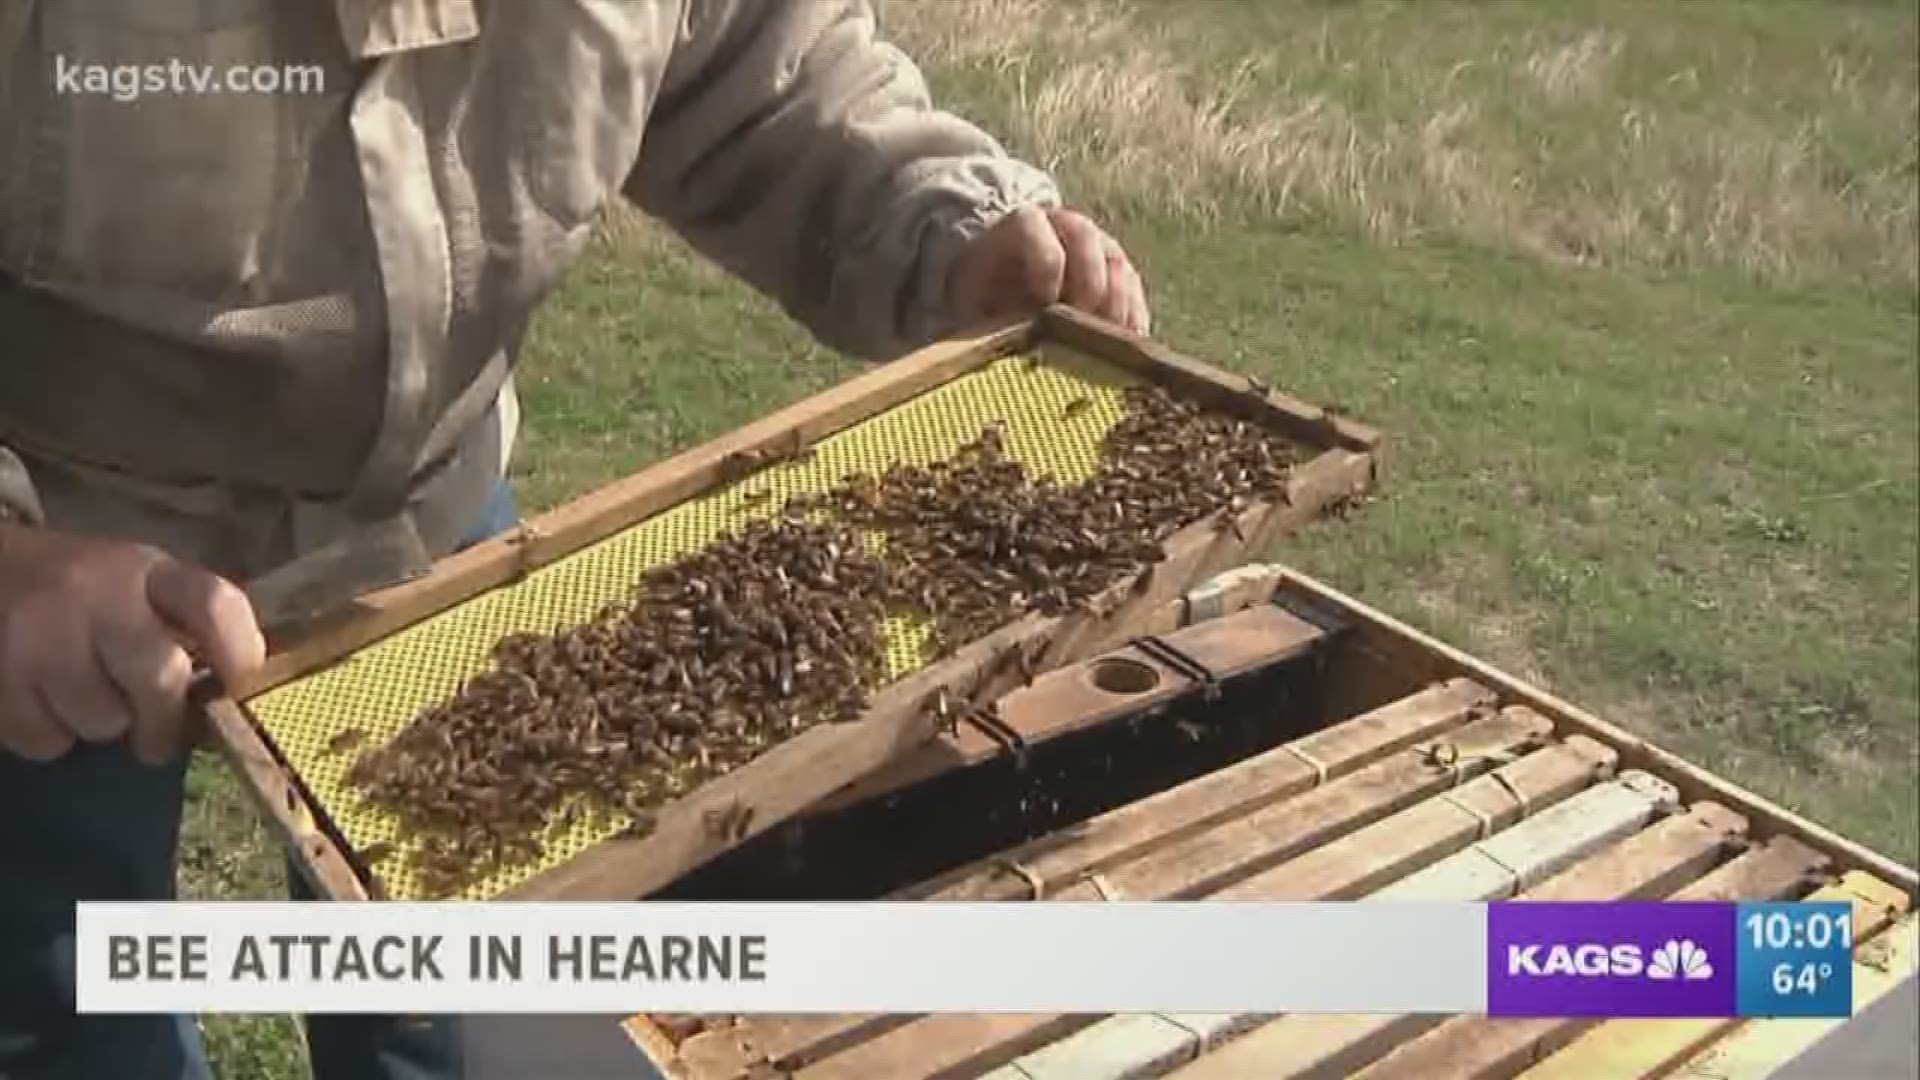 The city of Hearne has been warning the community about bees. This comes after a man was put in the ICU following a bee attack while mowing his lawn Monday morning.